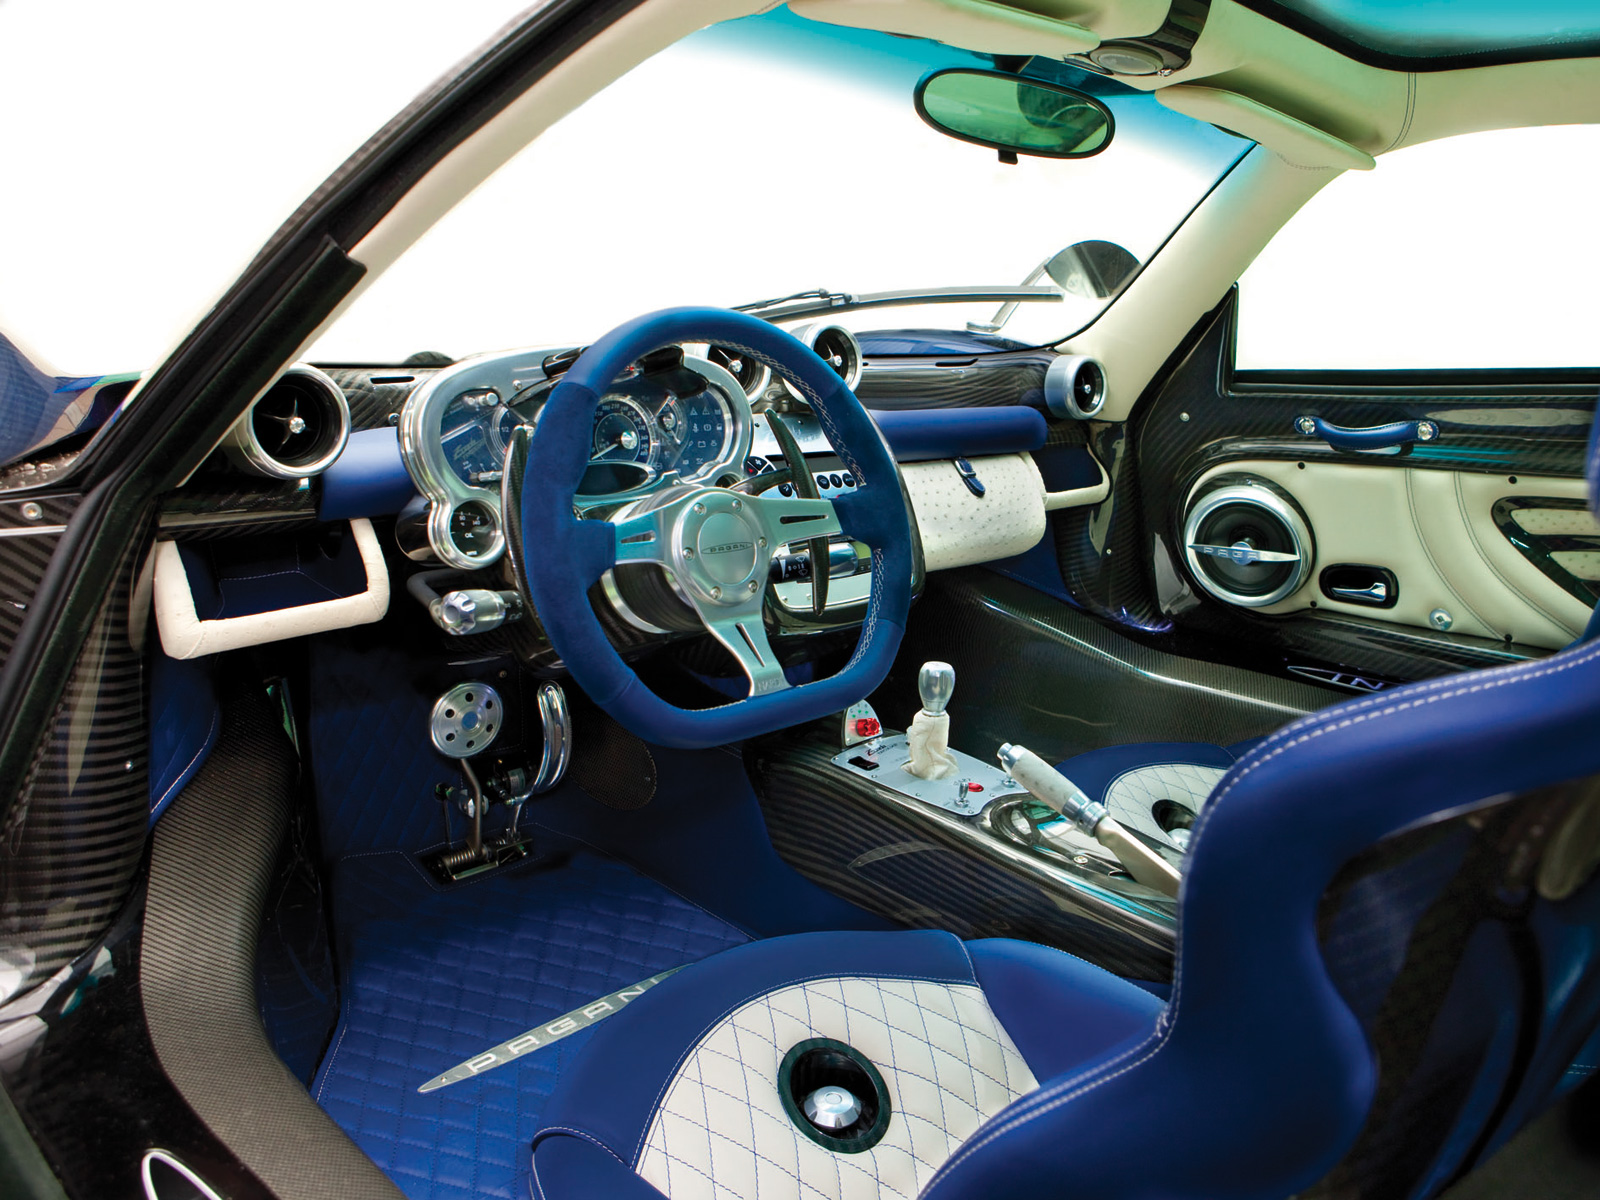 The Pagani Zonda Tricolore is a 2 door coupe with a starting MSRP of 1,960,000Top Speed 220 MPH, 0-60 3.4 in Seconds